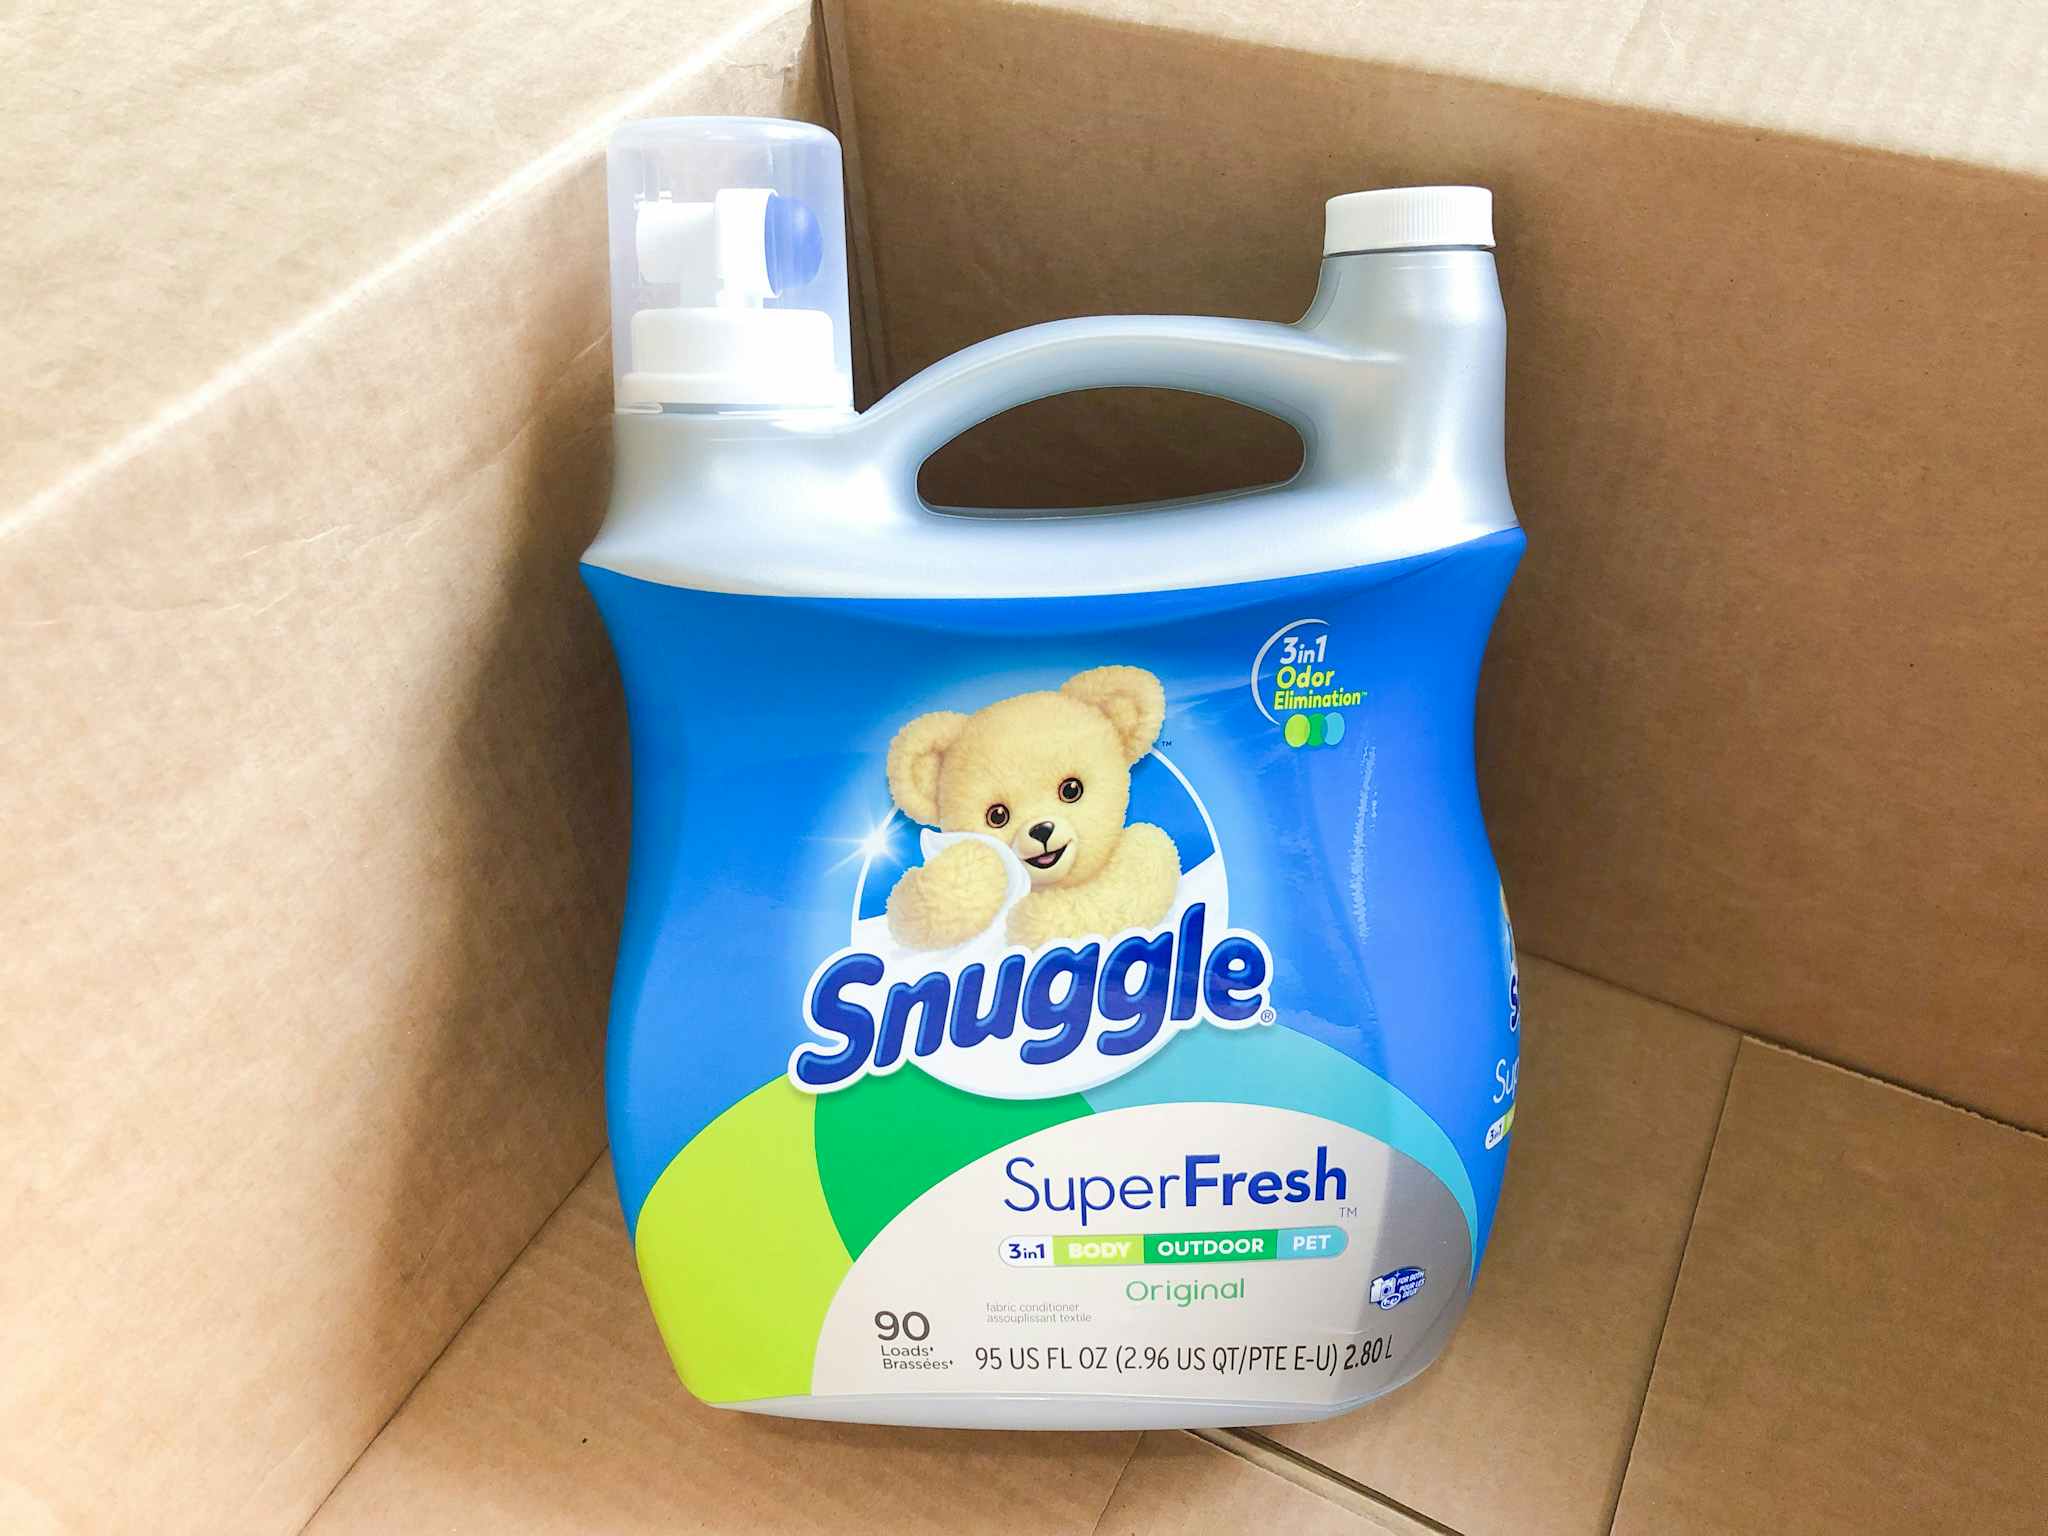 A Snuggle fabric softener bottle in an open delivery box.